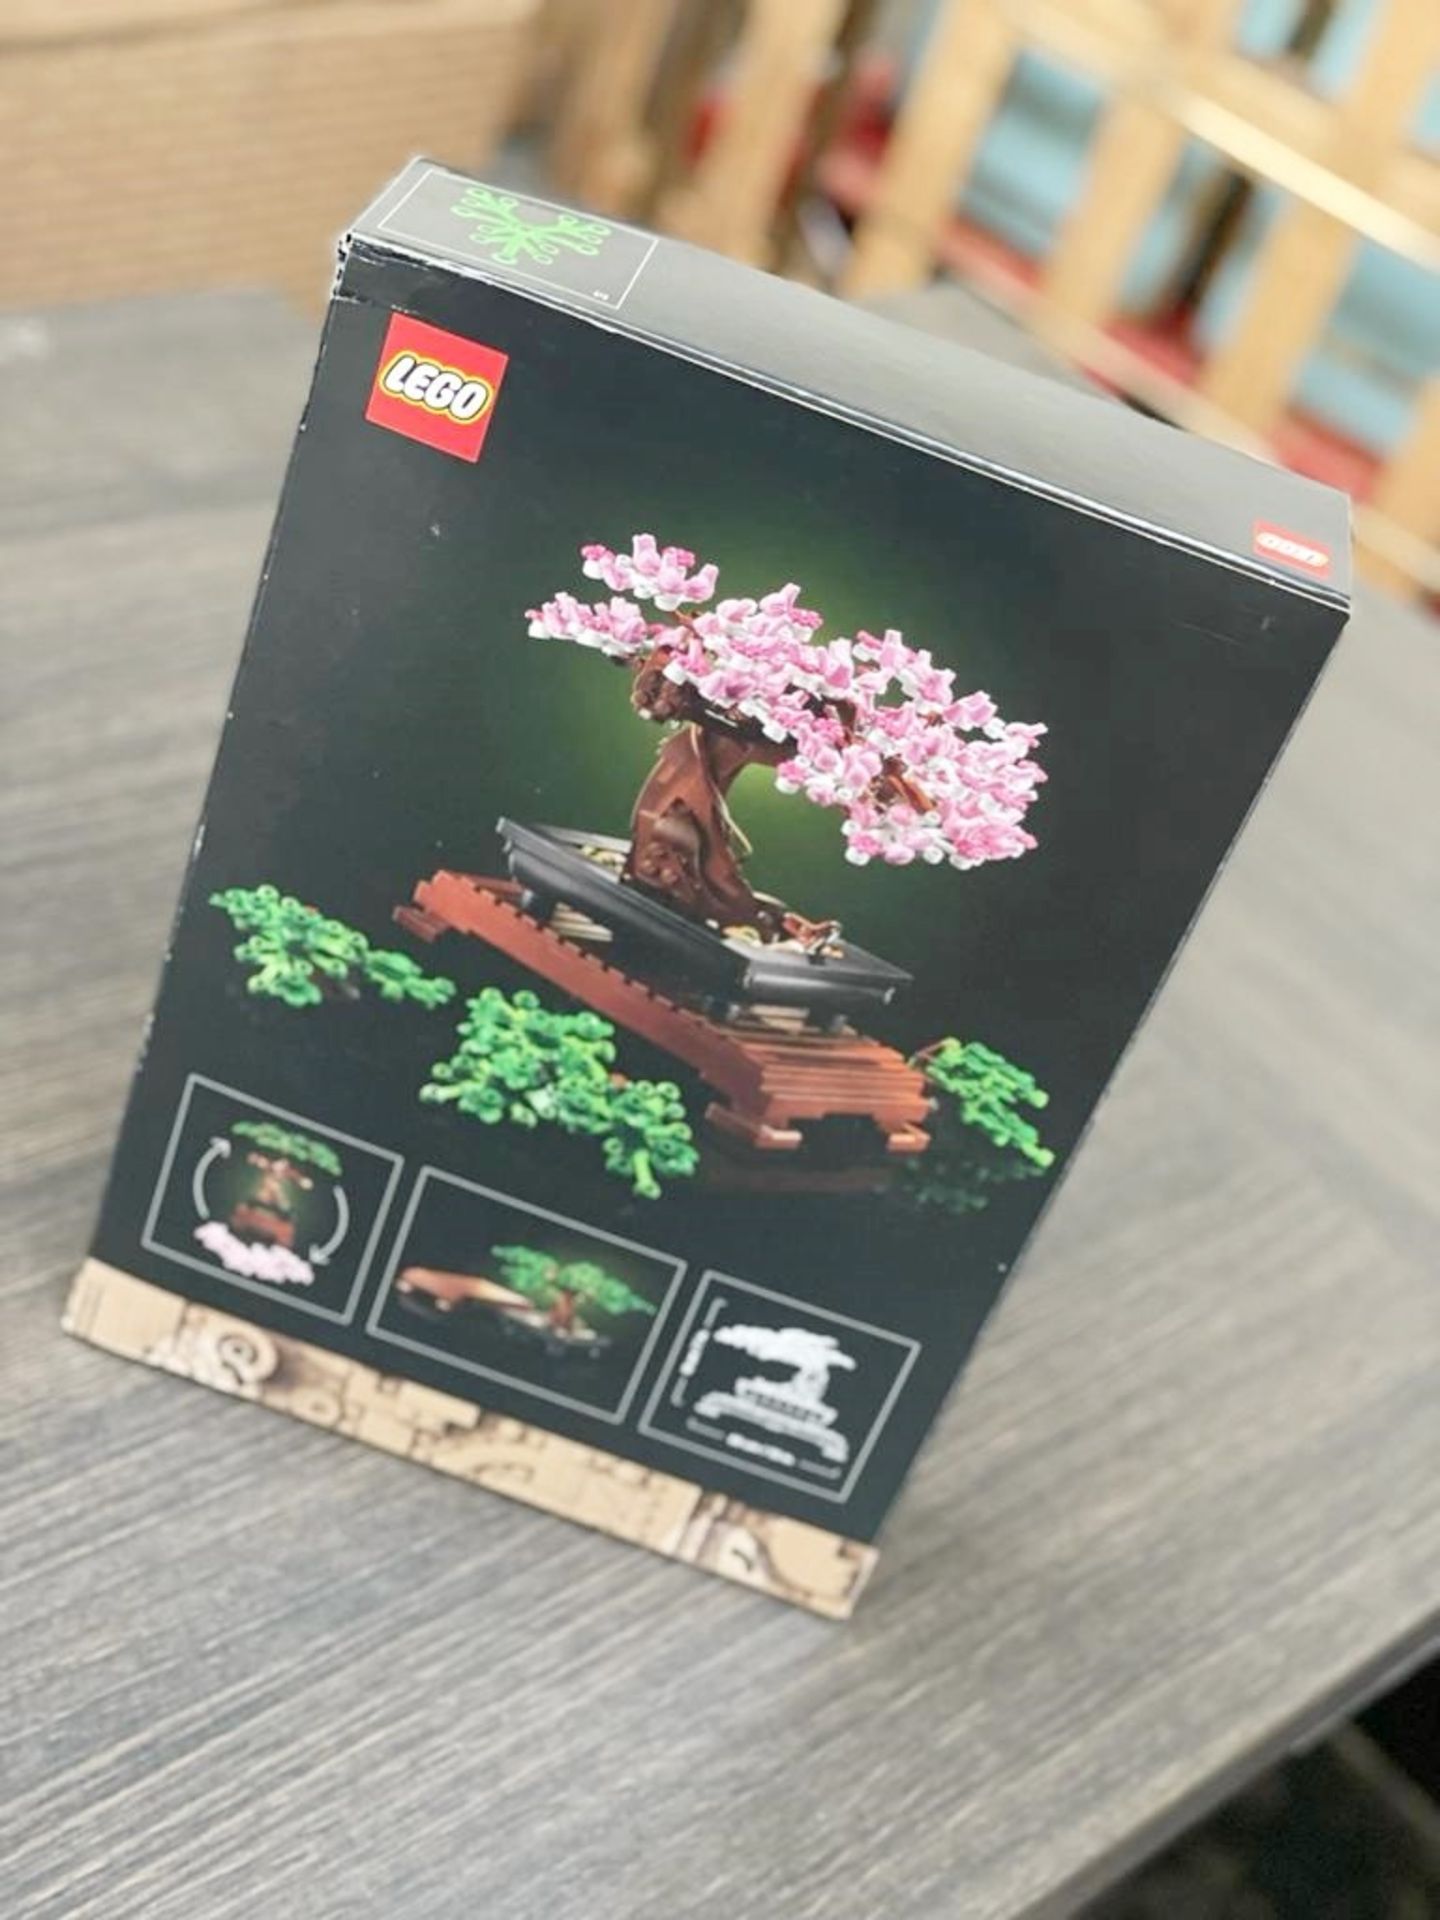 1 x Lego Botanical Collection Bonsai Tree 878 Pieces 18+ (10281) - Brand New - CL987 - Ref: - Image 5 of 5